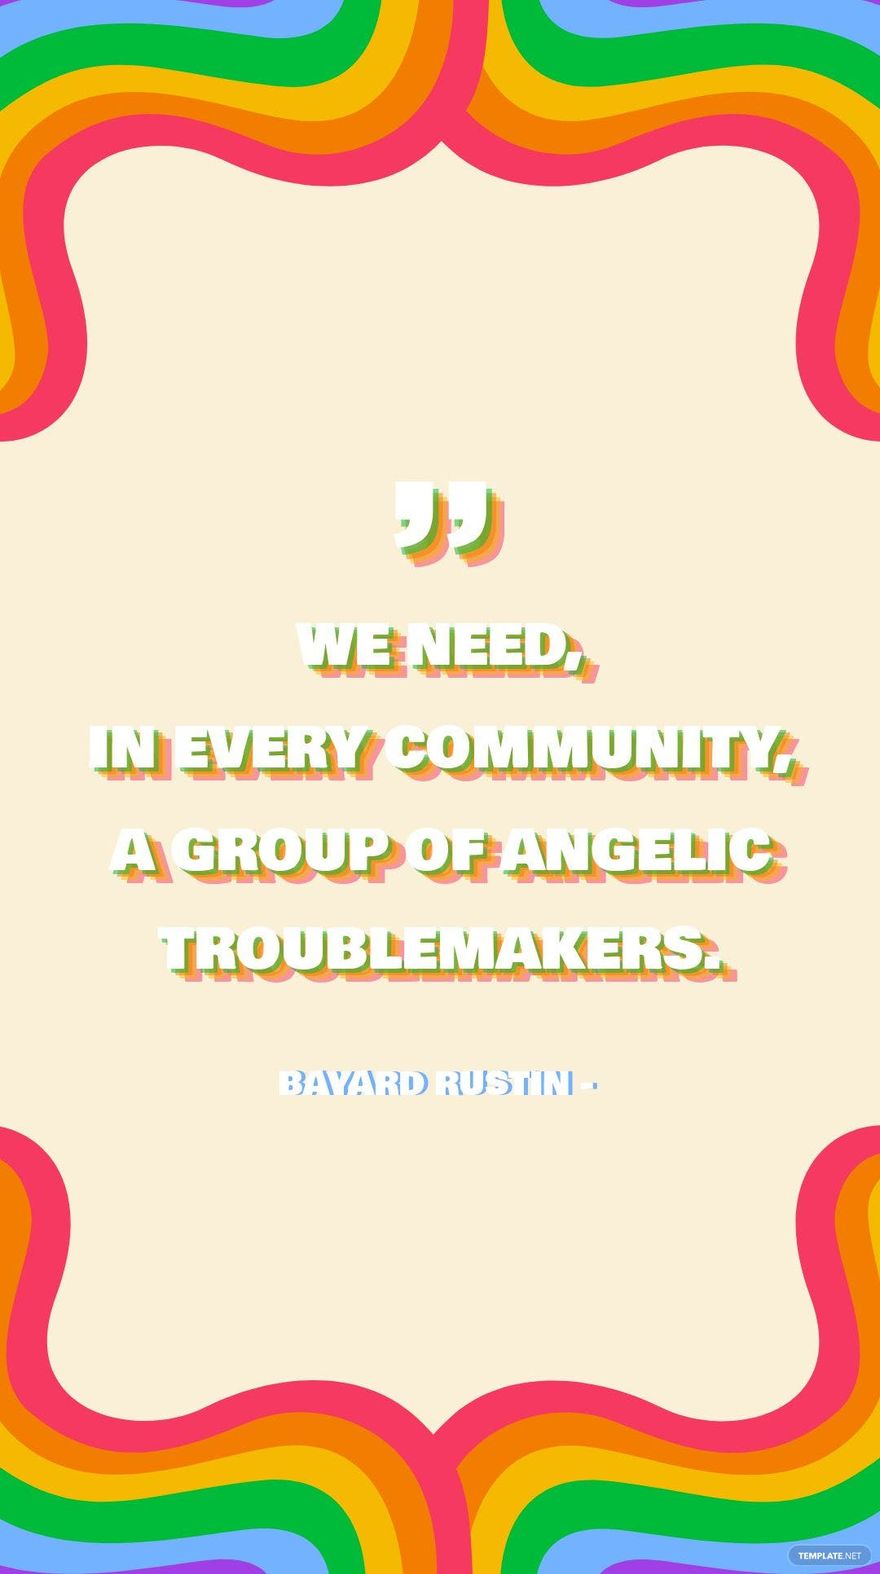 Bayard Rustin - We need, in every community, a group of angelic troublemakers. in JPG